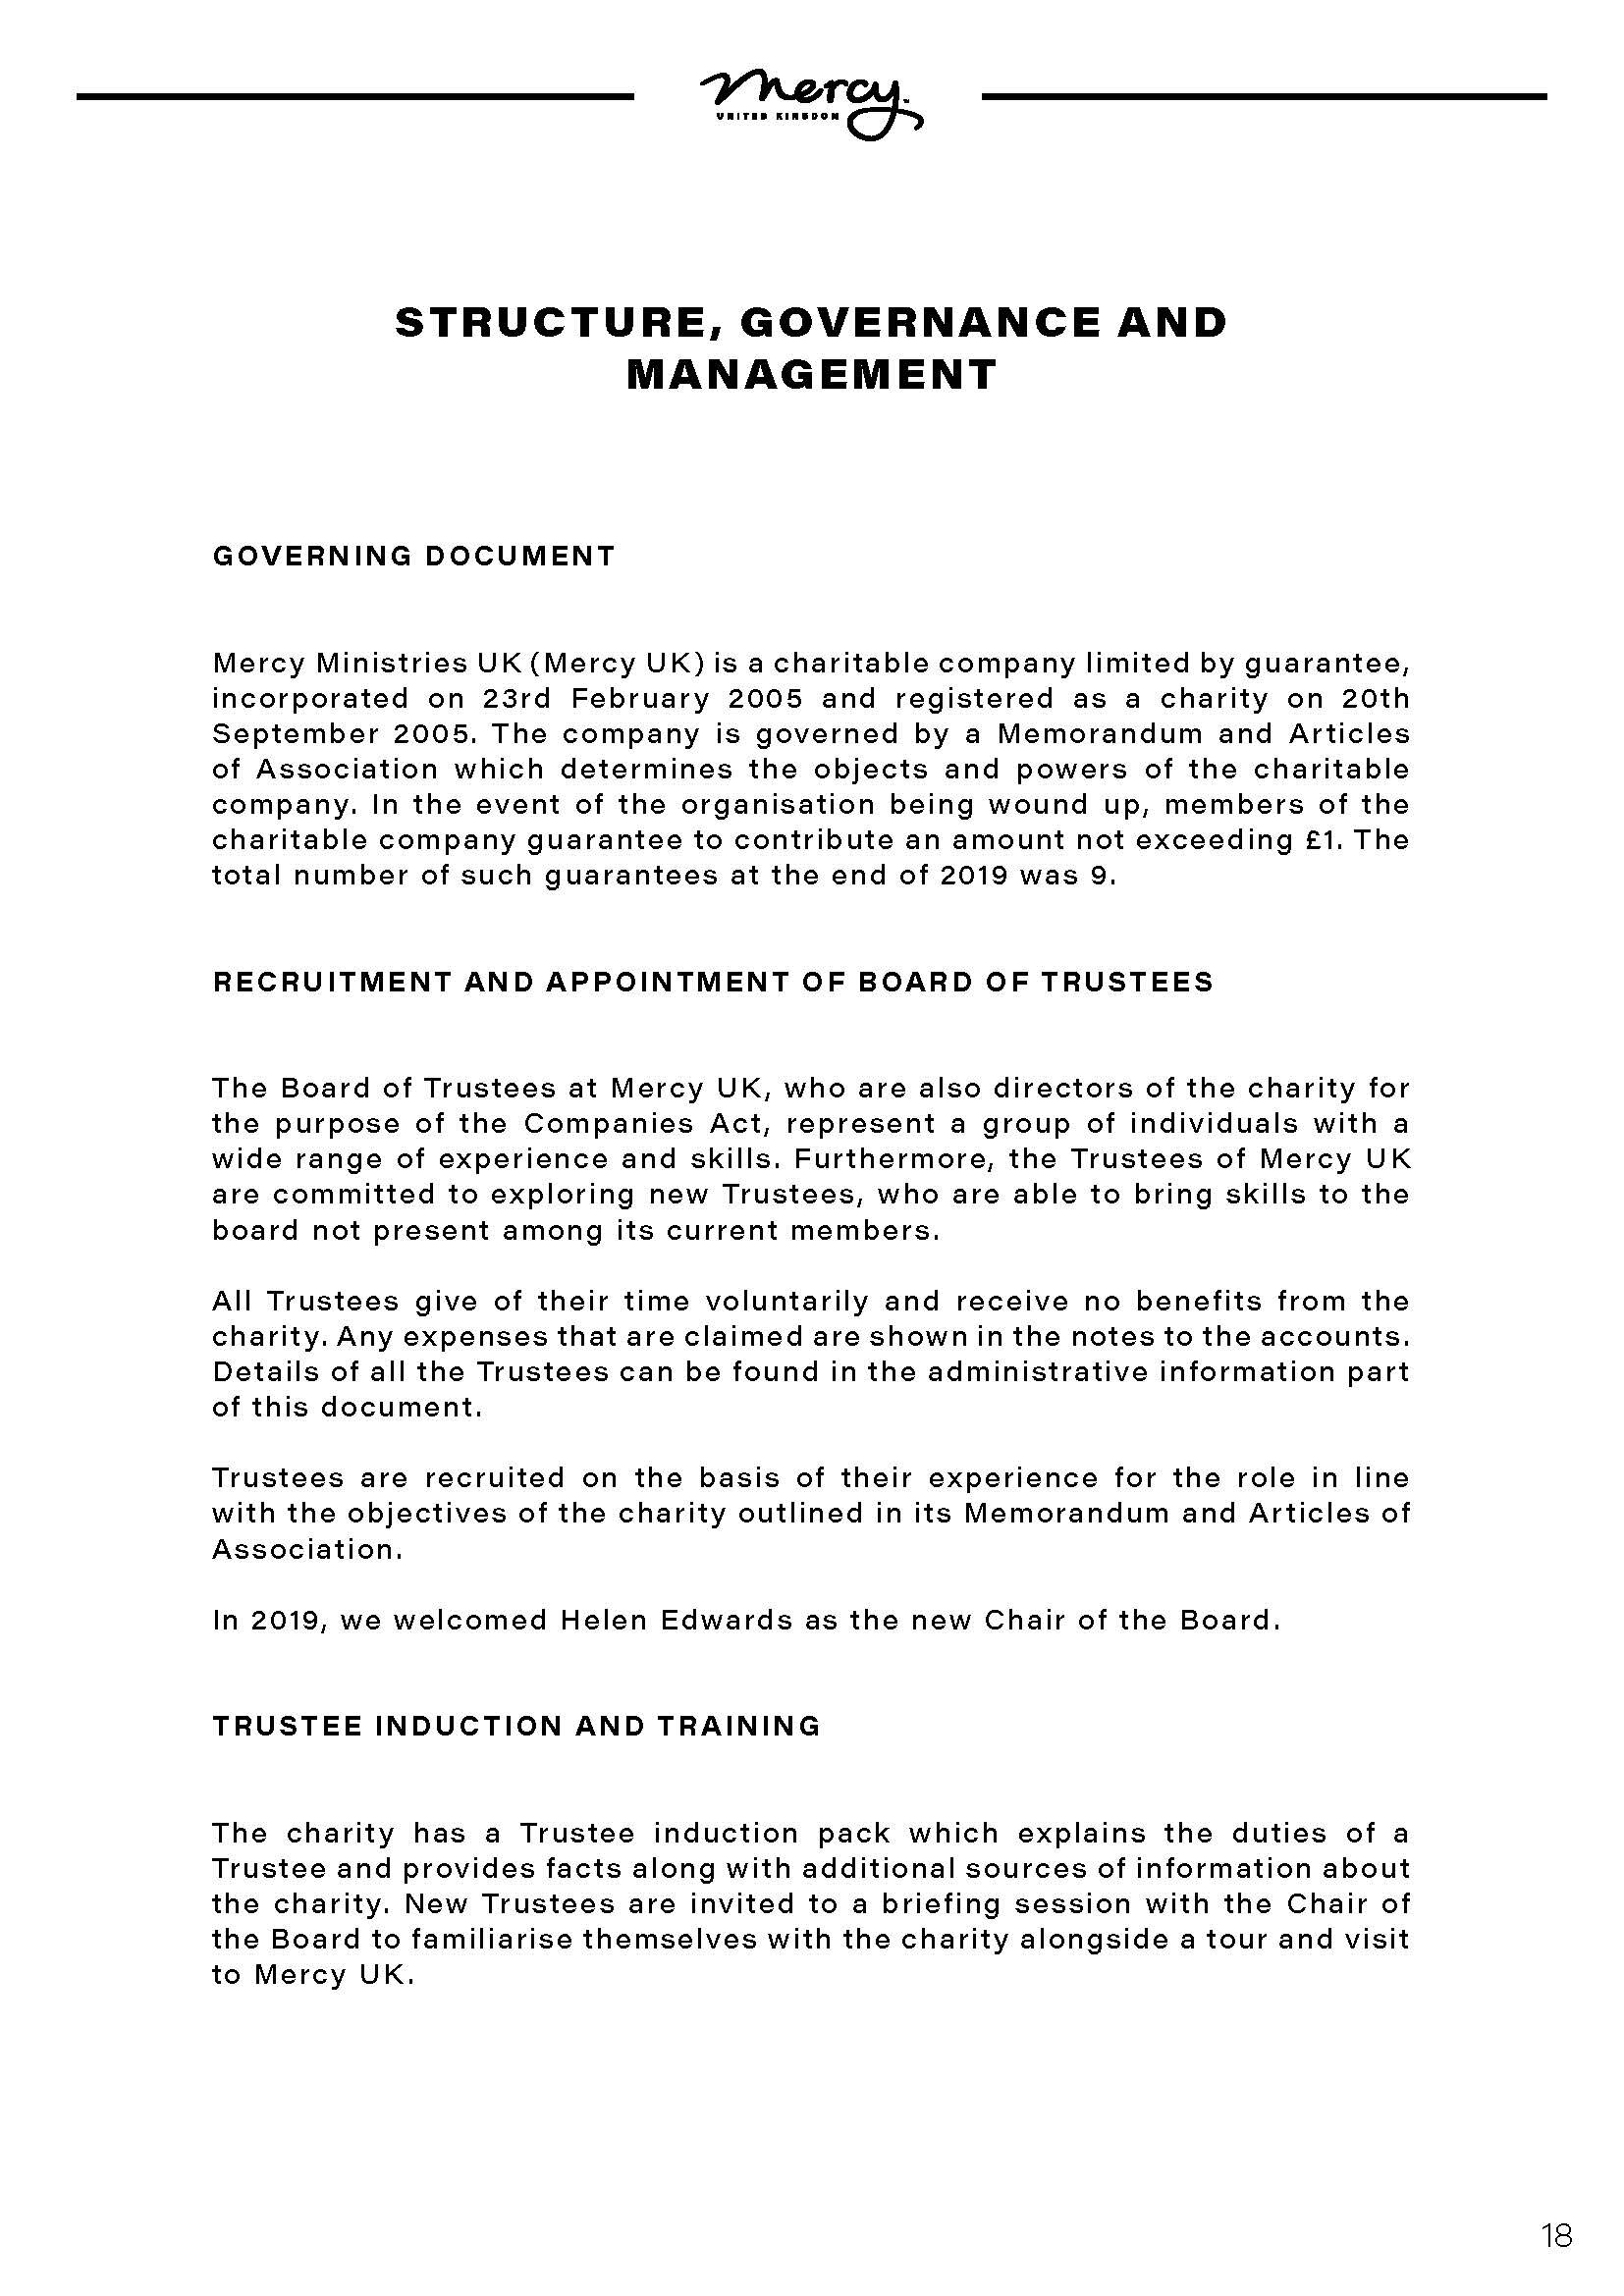 Trustee Report_Amends Page 1_Page_18.jpg